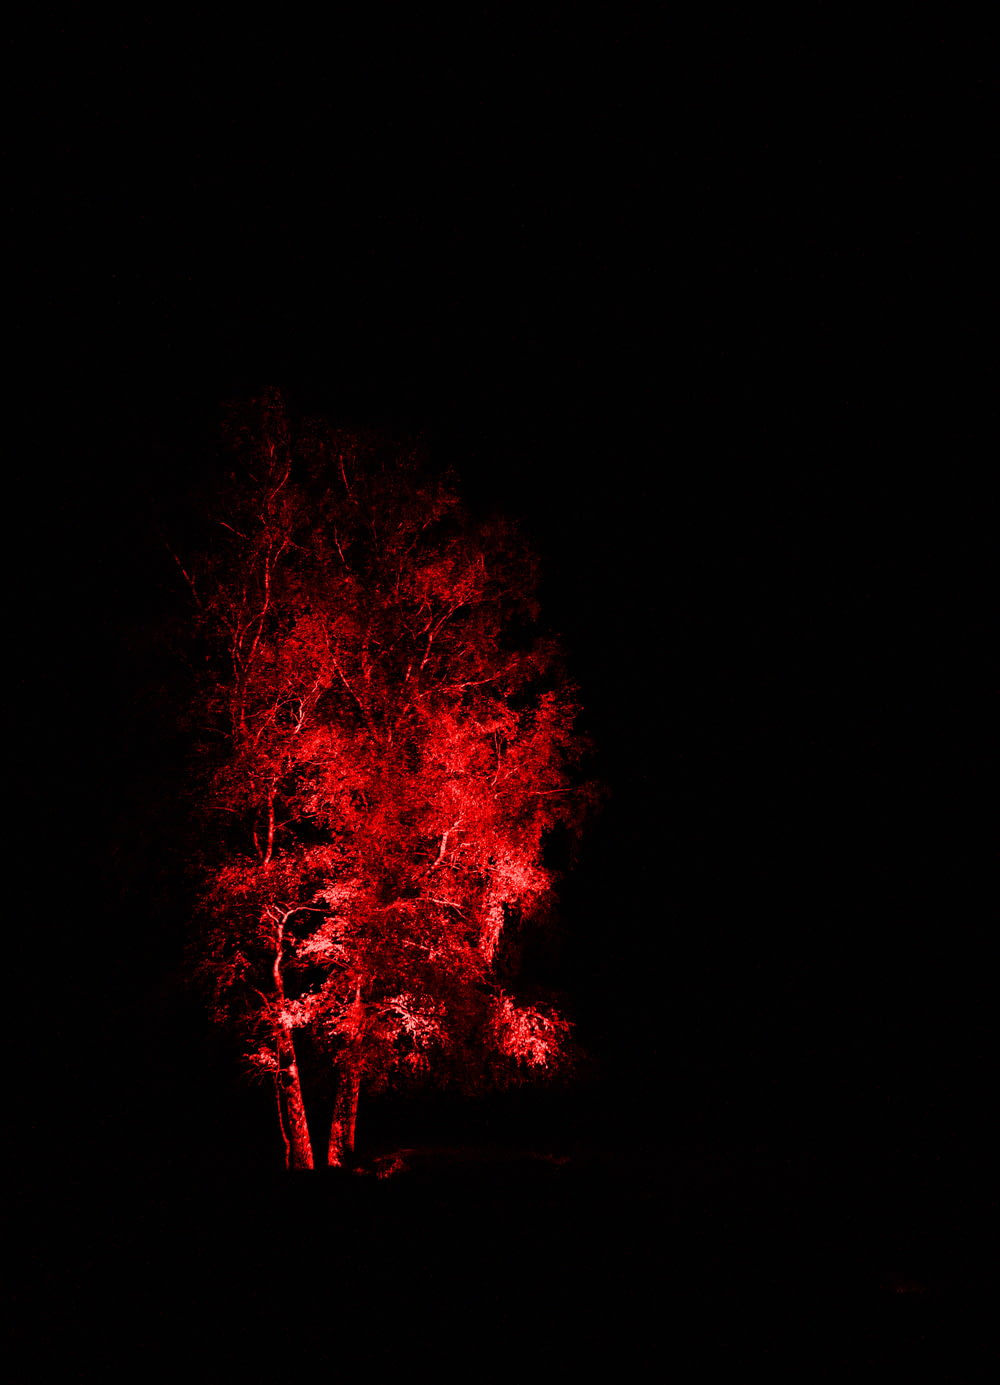 red and black fire during night time